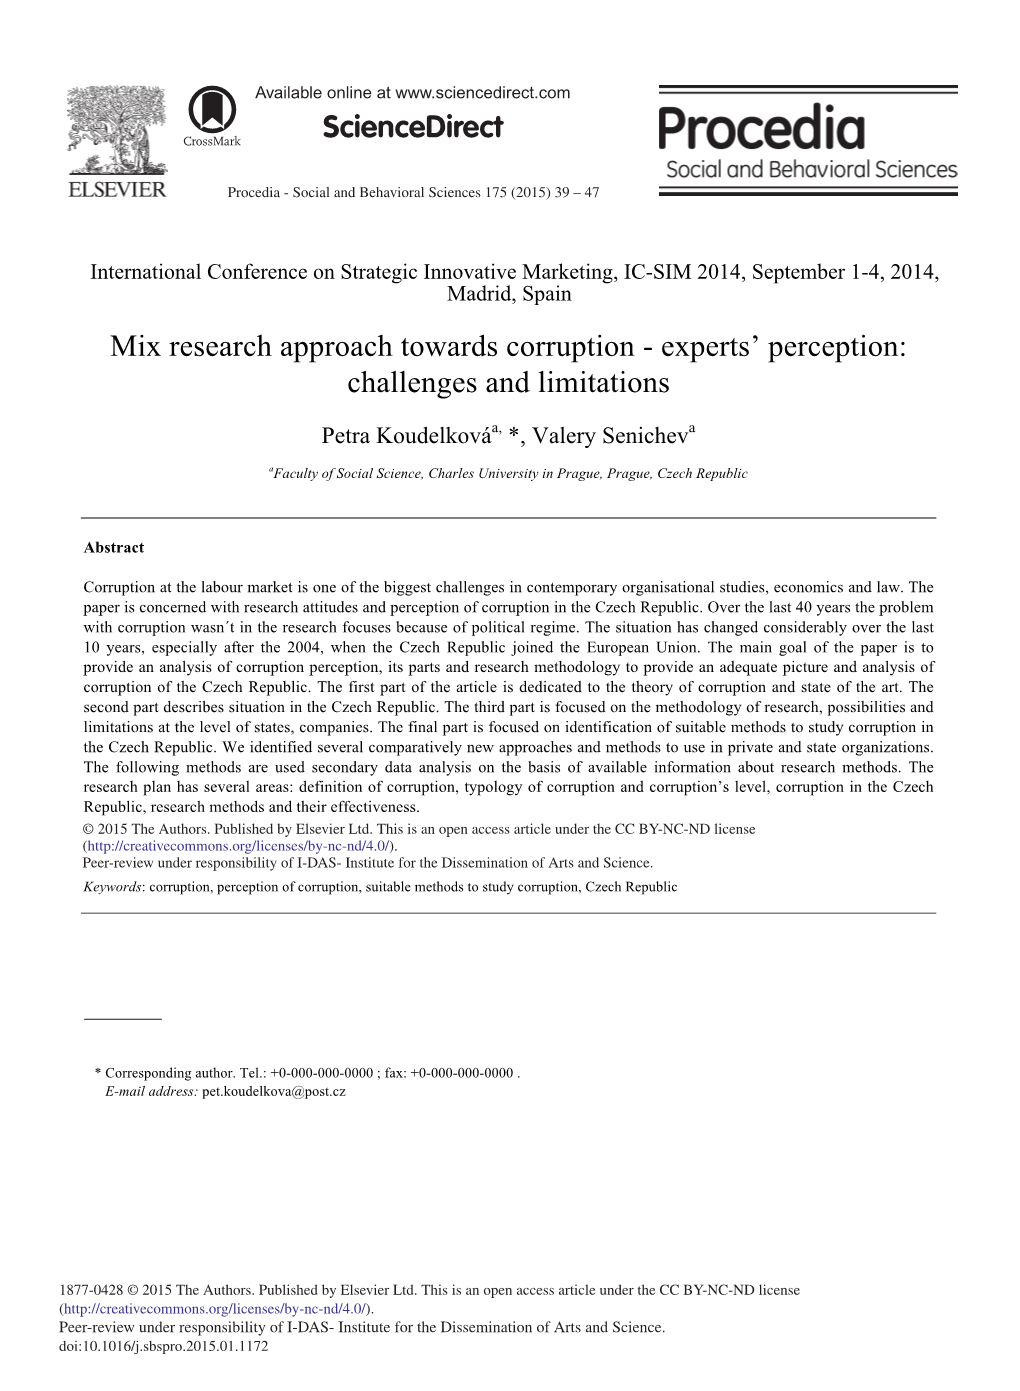 Mix Research Approach Towards Corruption - Experts’ Perception: Challenges and Limitations